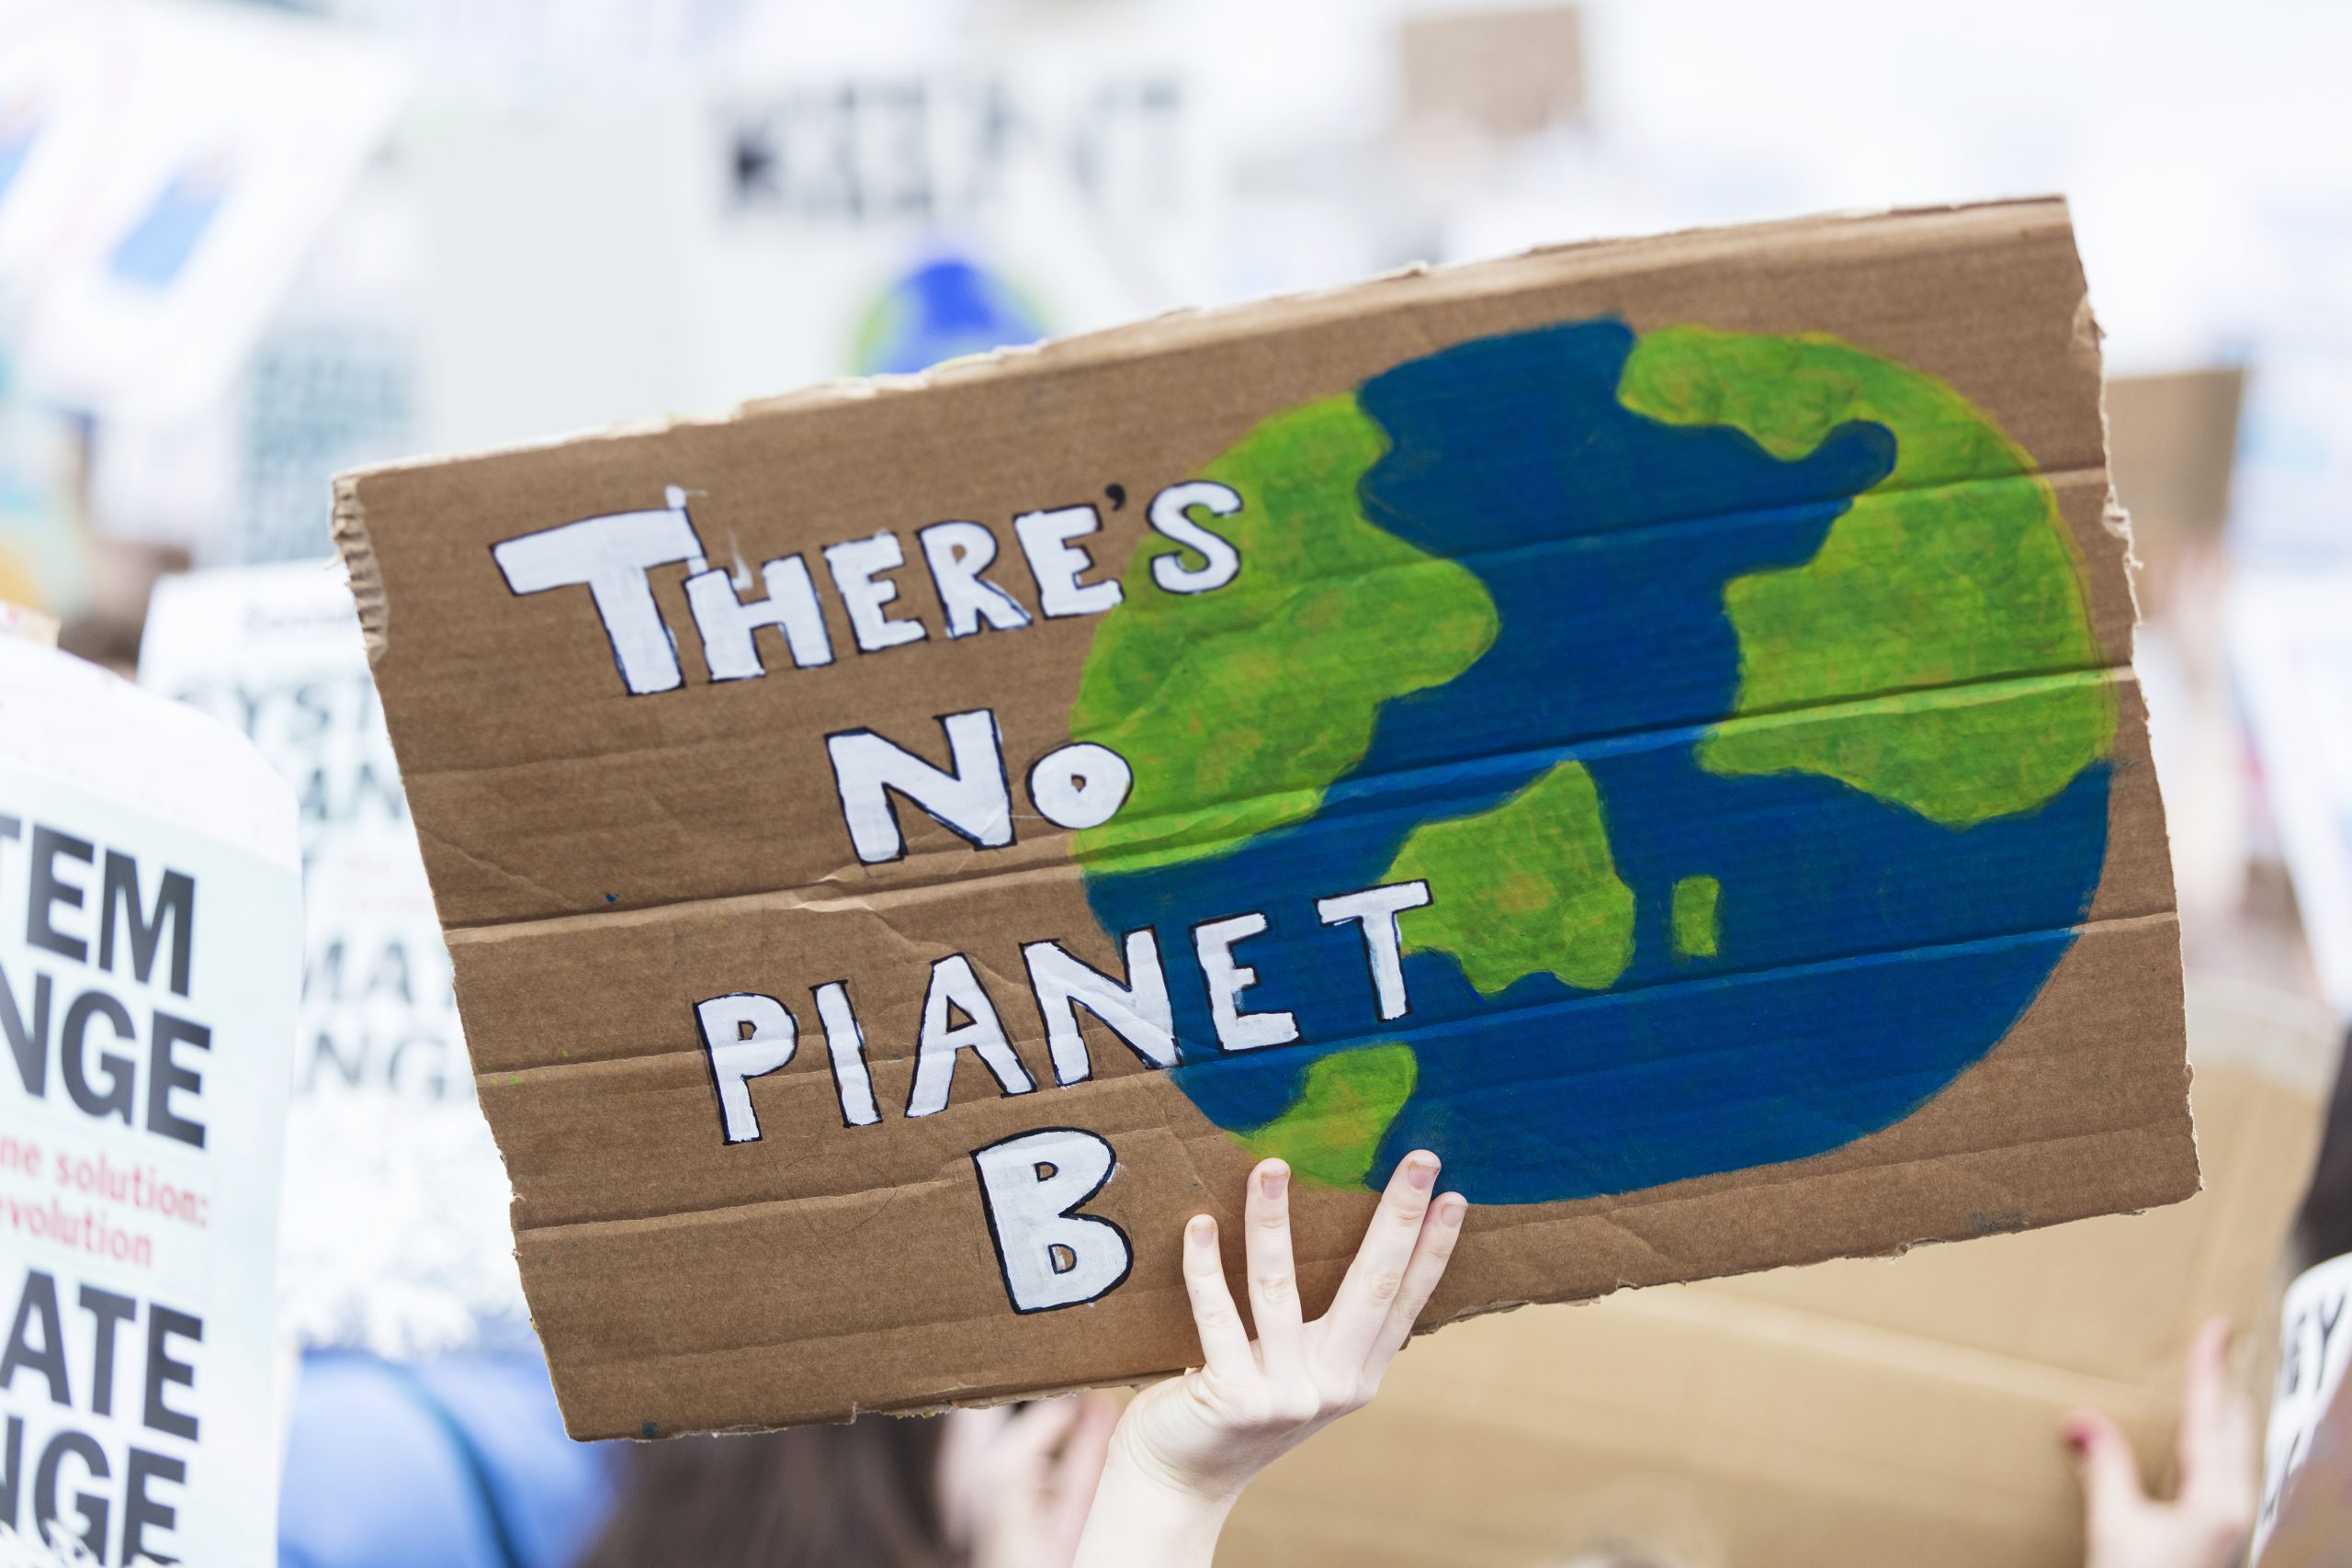 No planet B protest sign